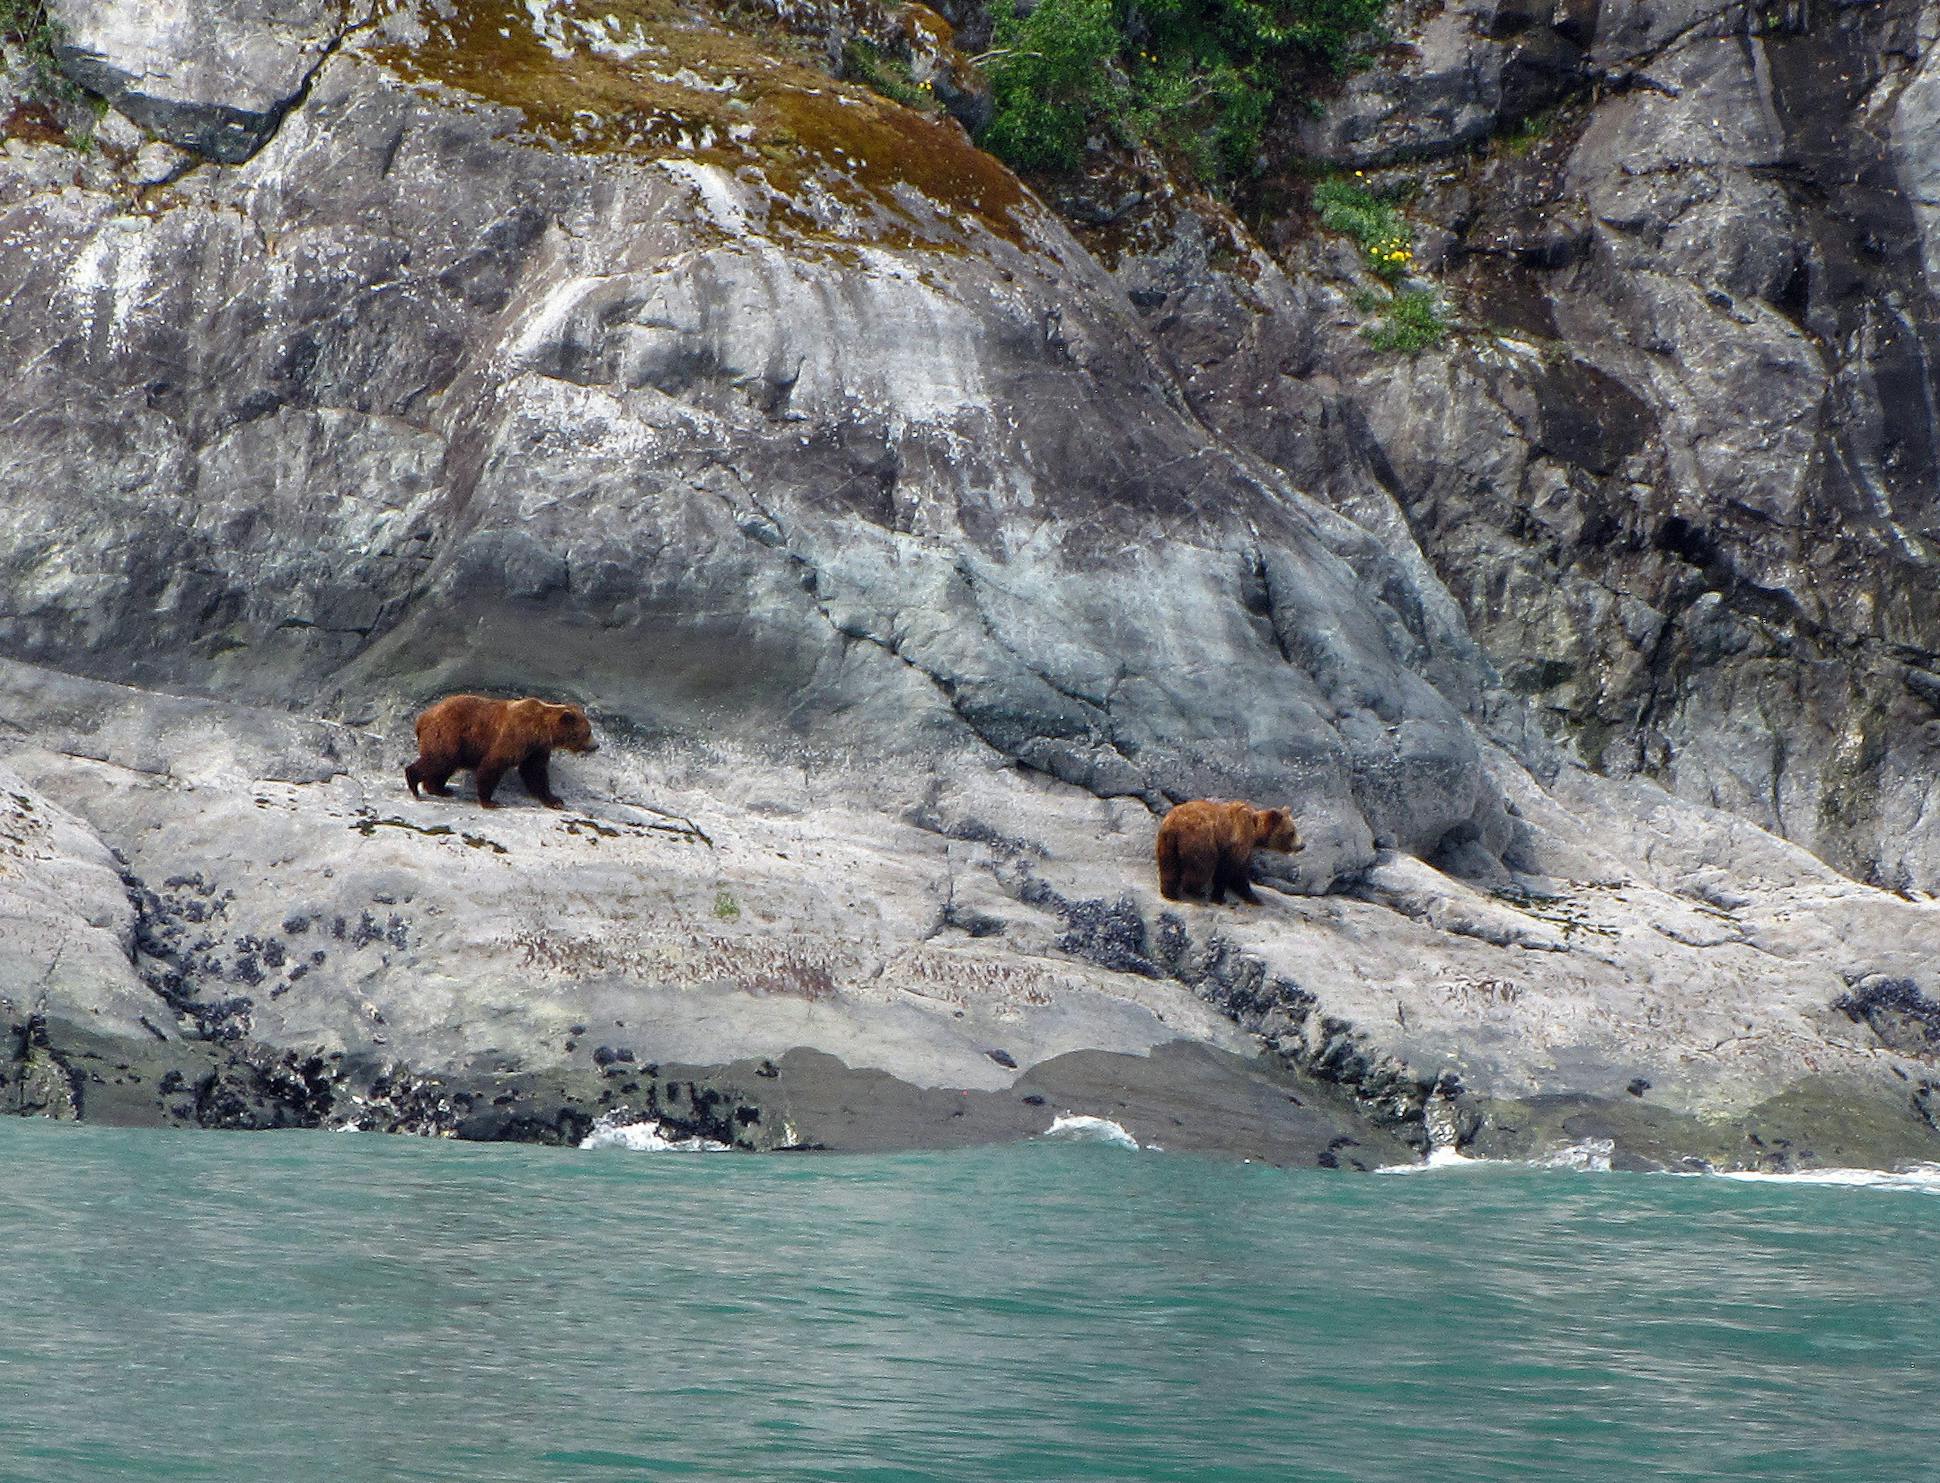 Brown bears in large numbers were spotted from the tour boat along the shoreline. They roamed along, turning rocks to look for salty tidal delicacies.